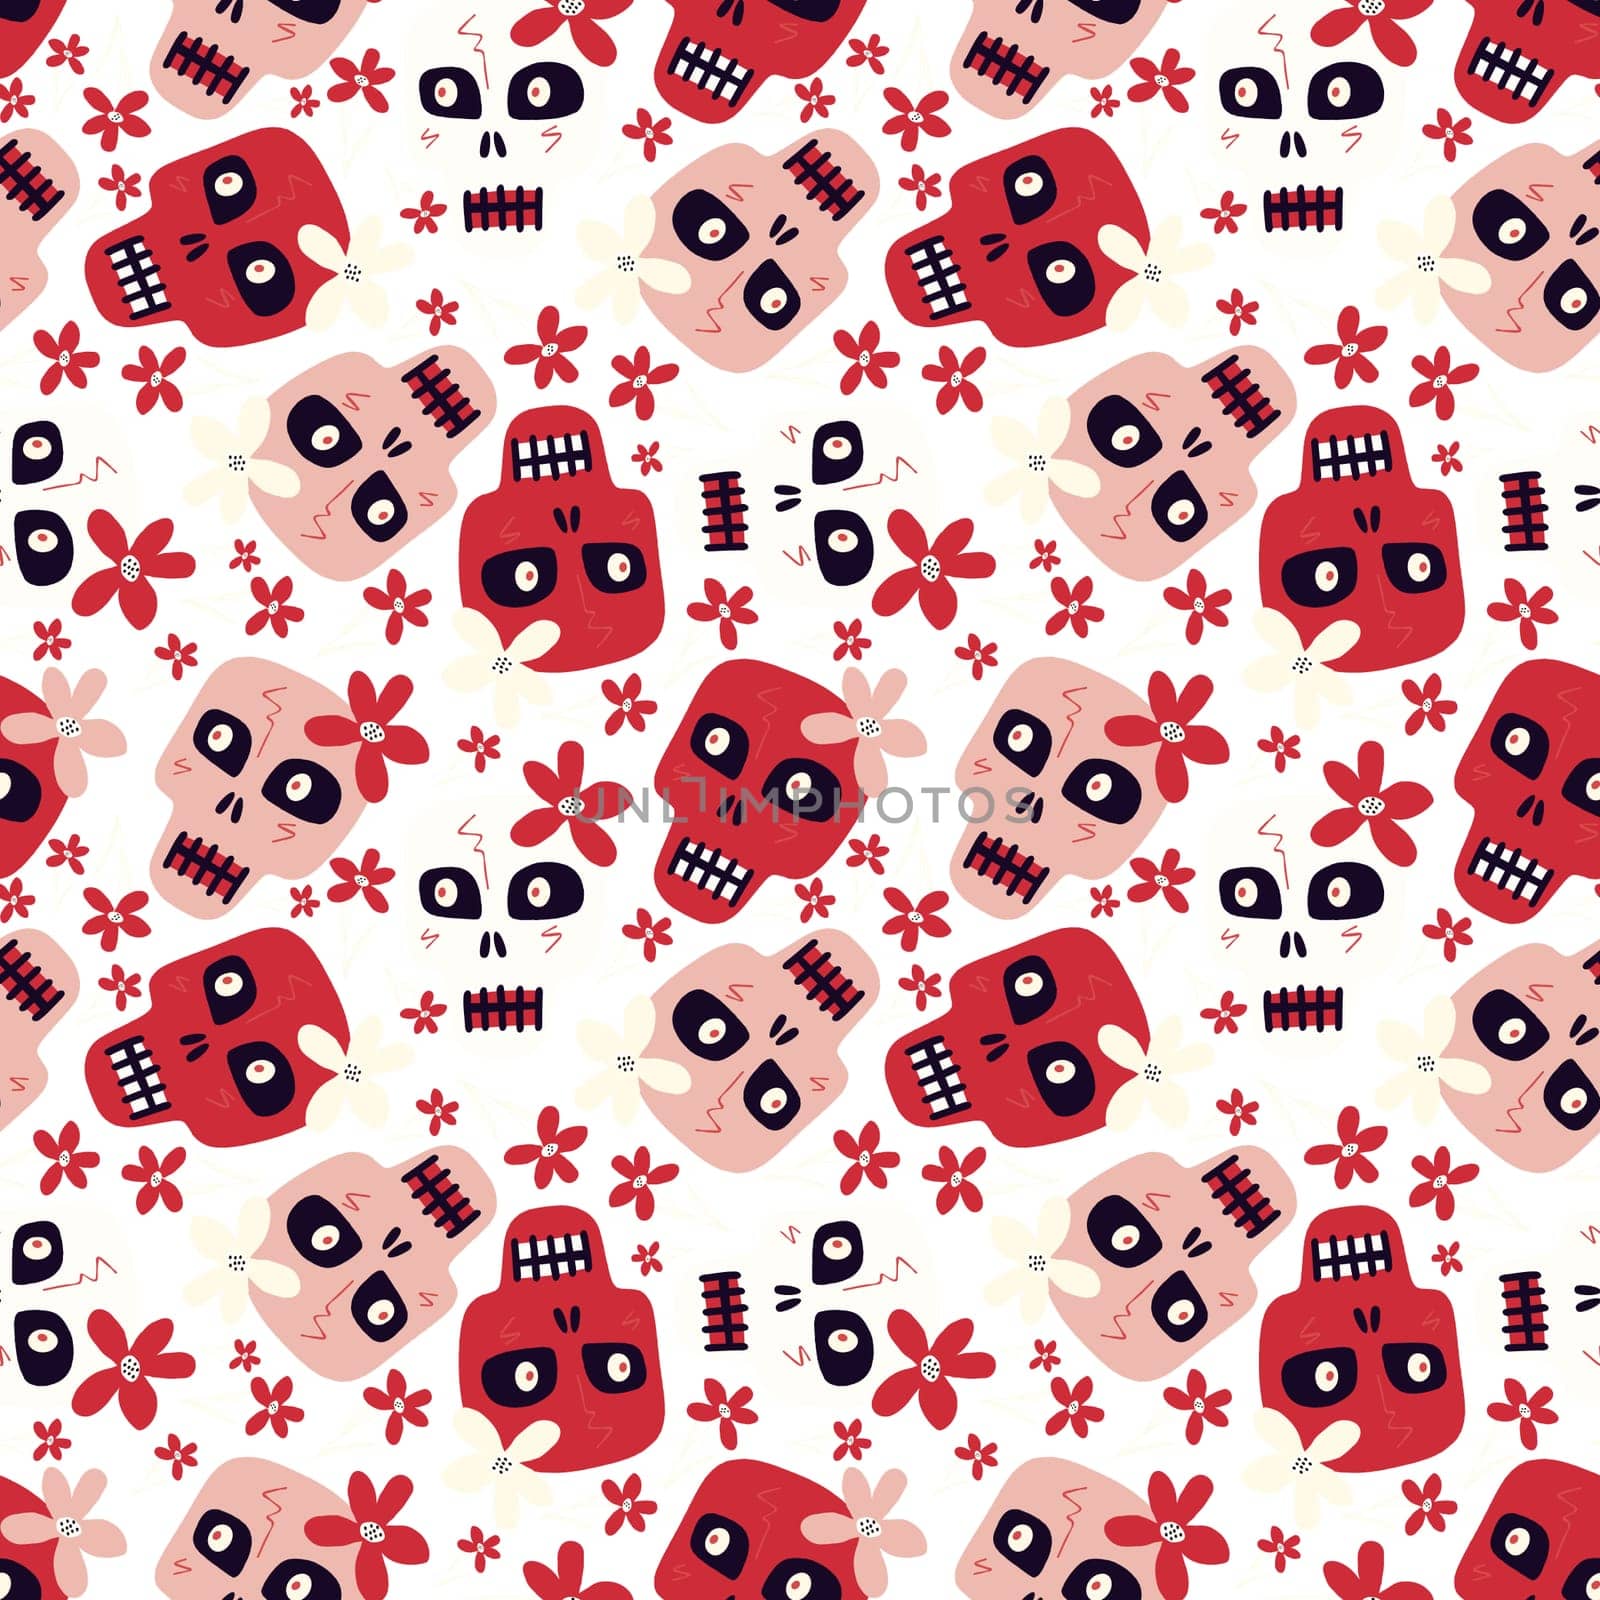 Pink and red Halloween cute cartoon pattern with funny skulls with a flowers by Dustick